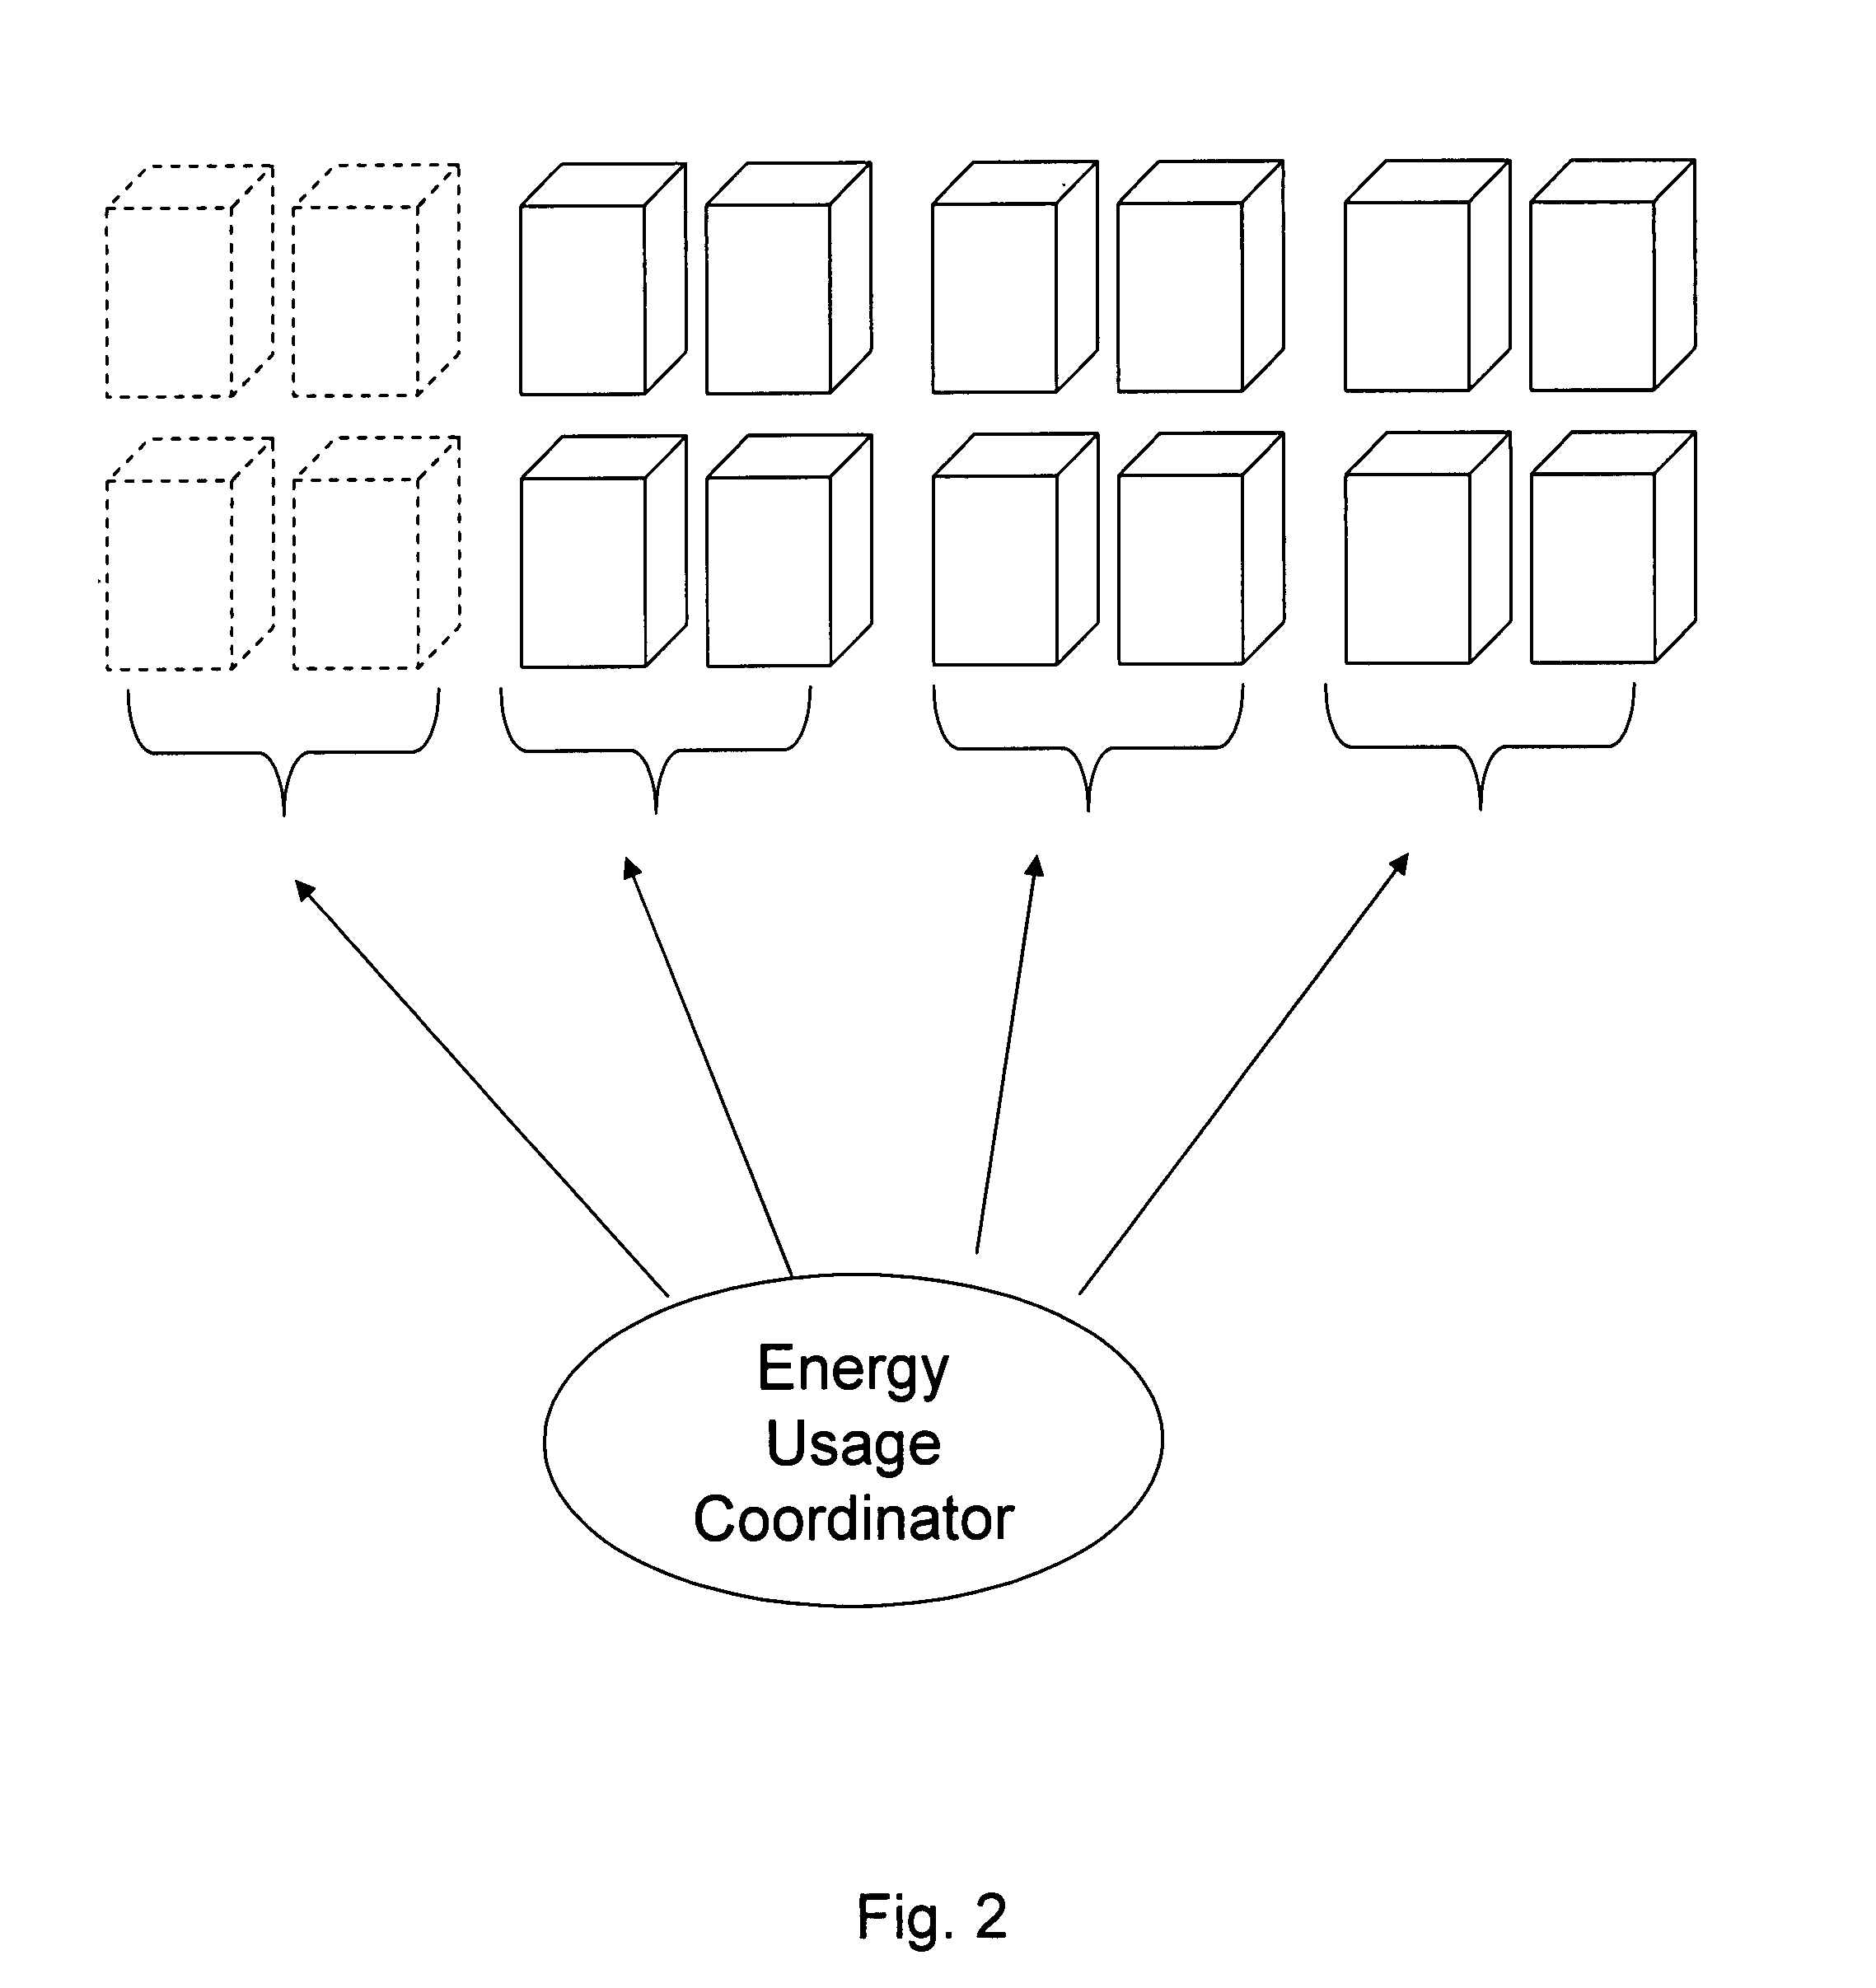 Multi-building control for demand response power usage control